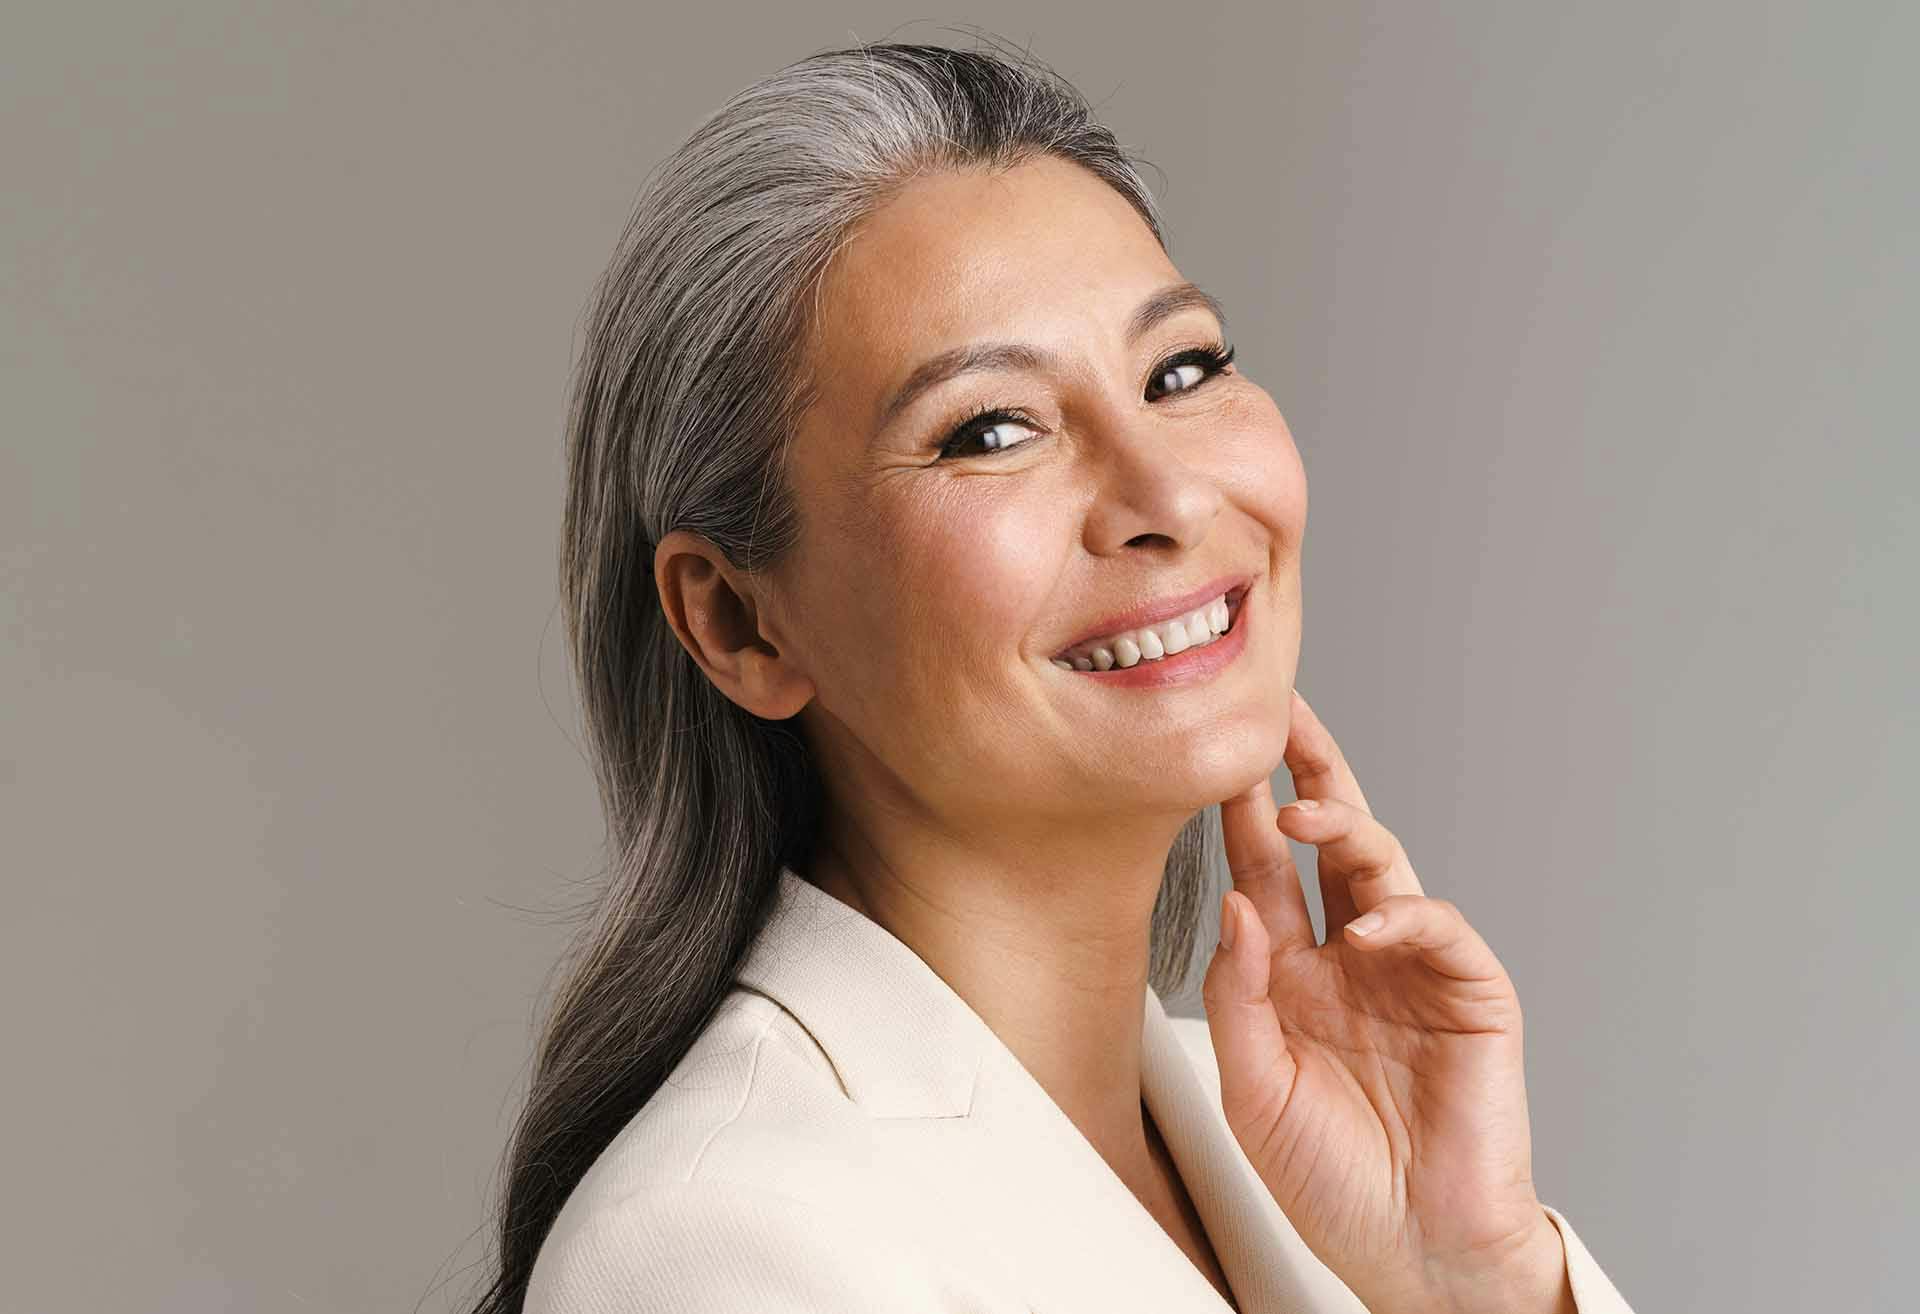 Older woman with gray hair and a hand against her face, smiling